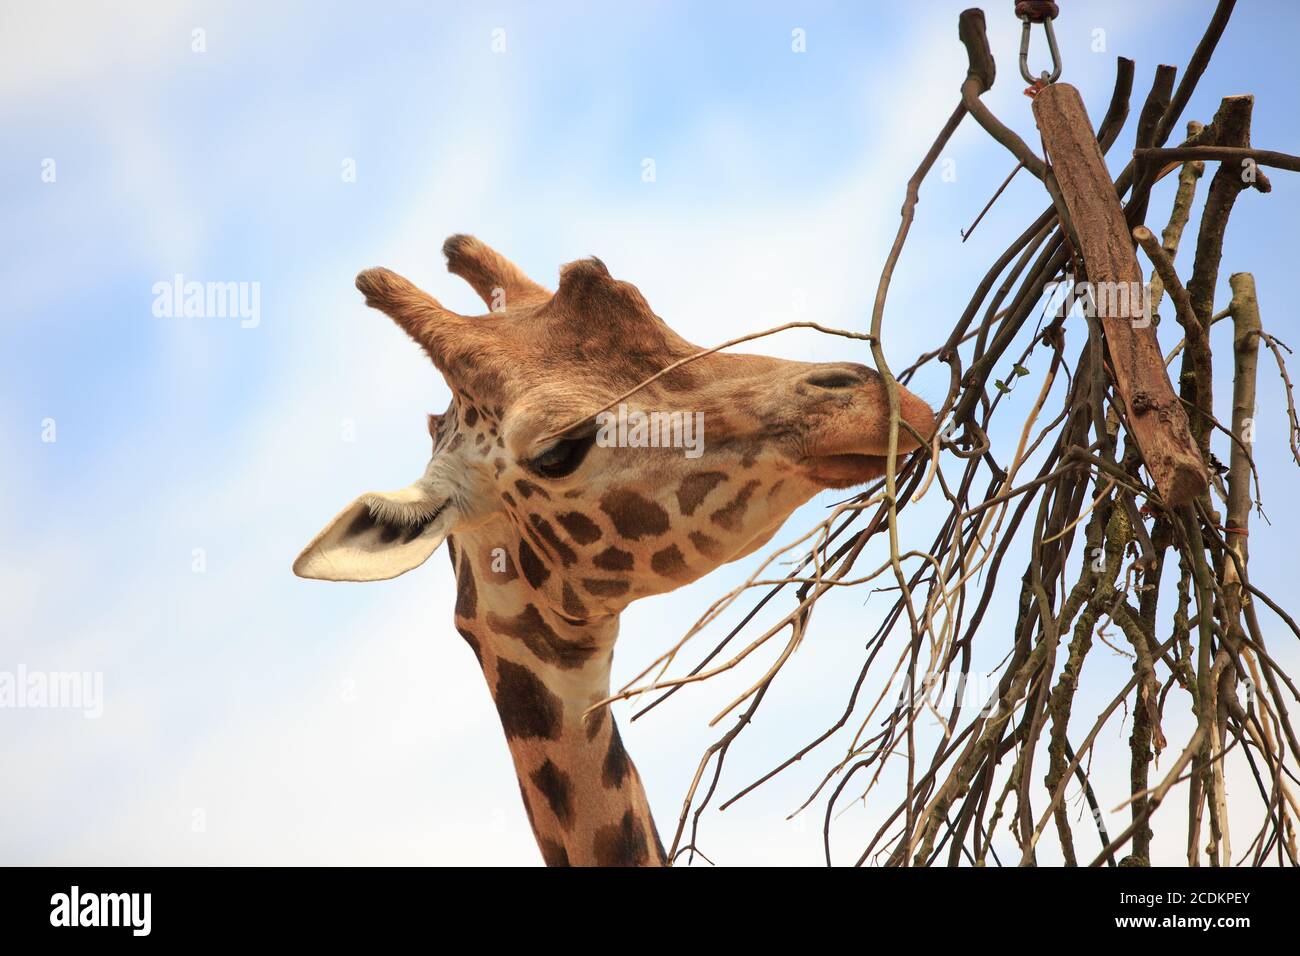 Close up of a Reticulated Giraffe (Giraffa reticulata) browsing on dry tree branches with a natural blue sky background Stock Photo